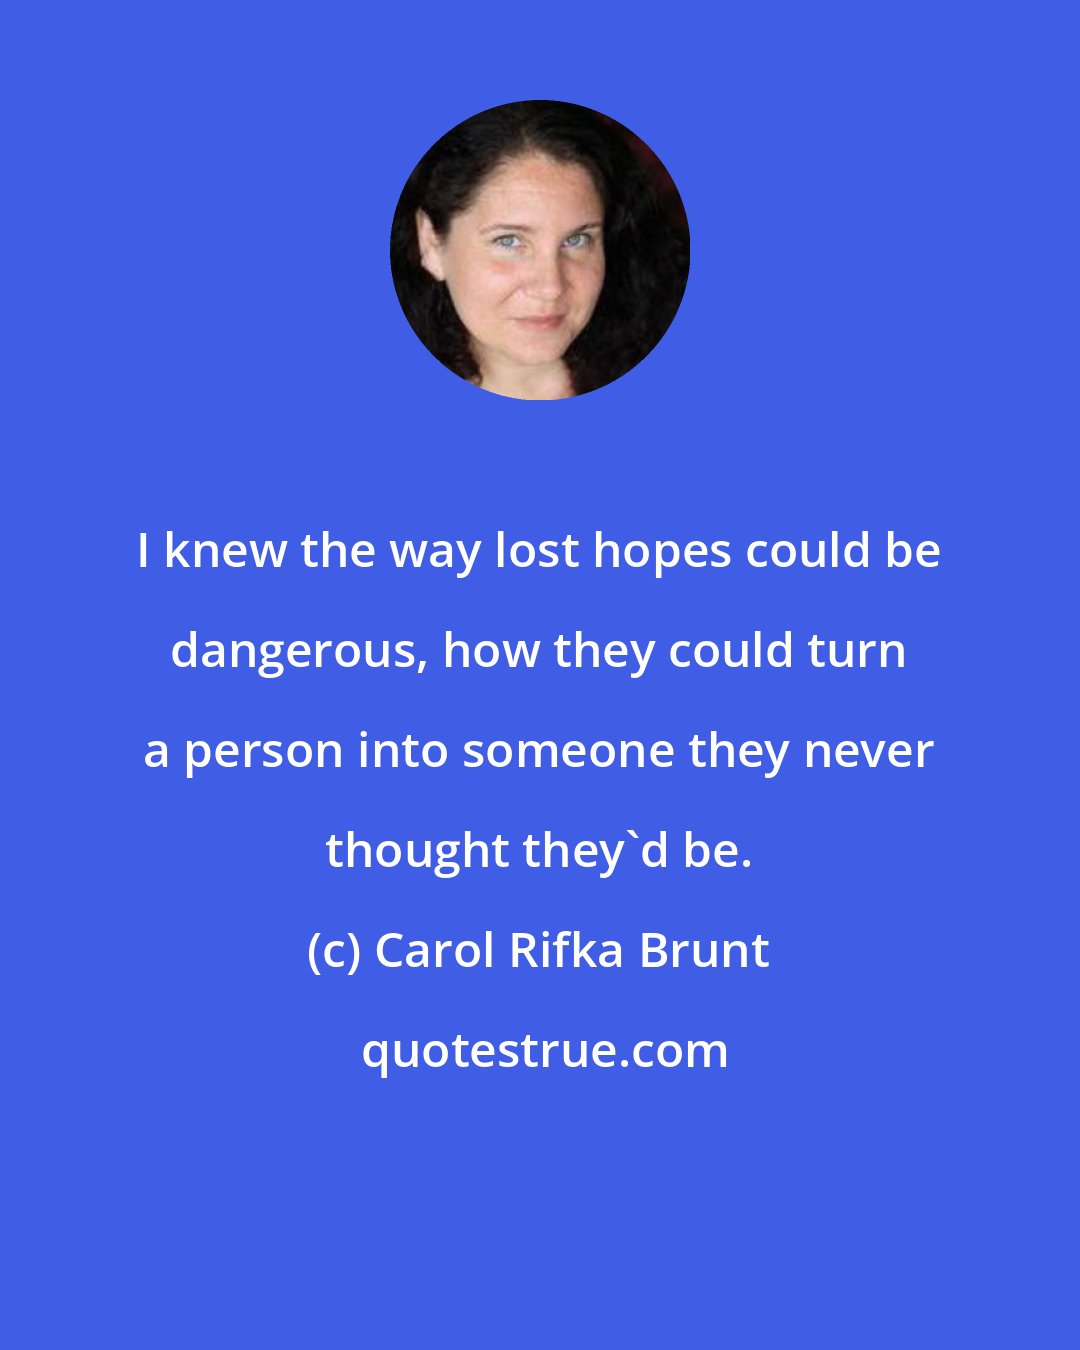 Carol Rifka Brunt: I knew the way lost hopes could be dangerous, how they could turn a person into someone they never thought they'd be.